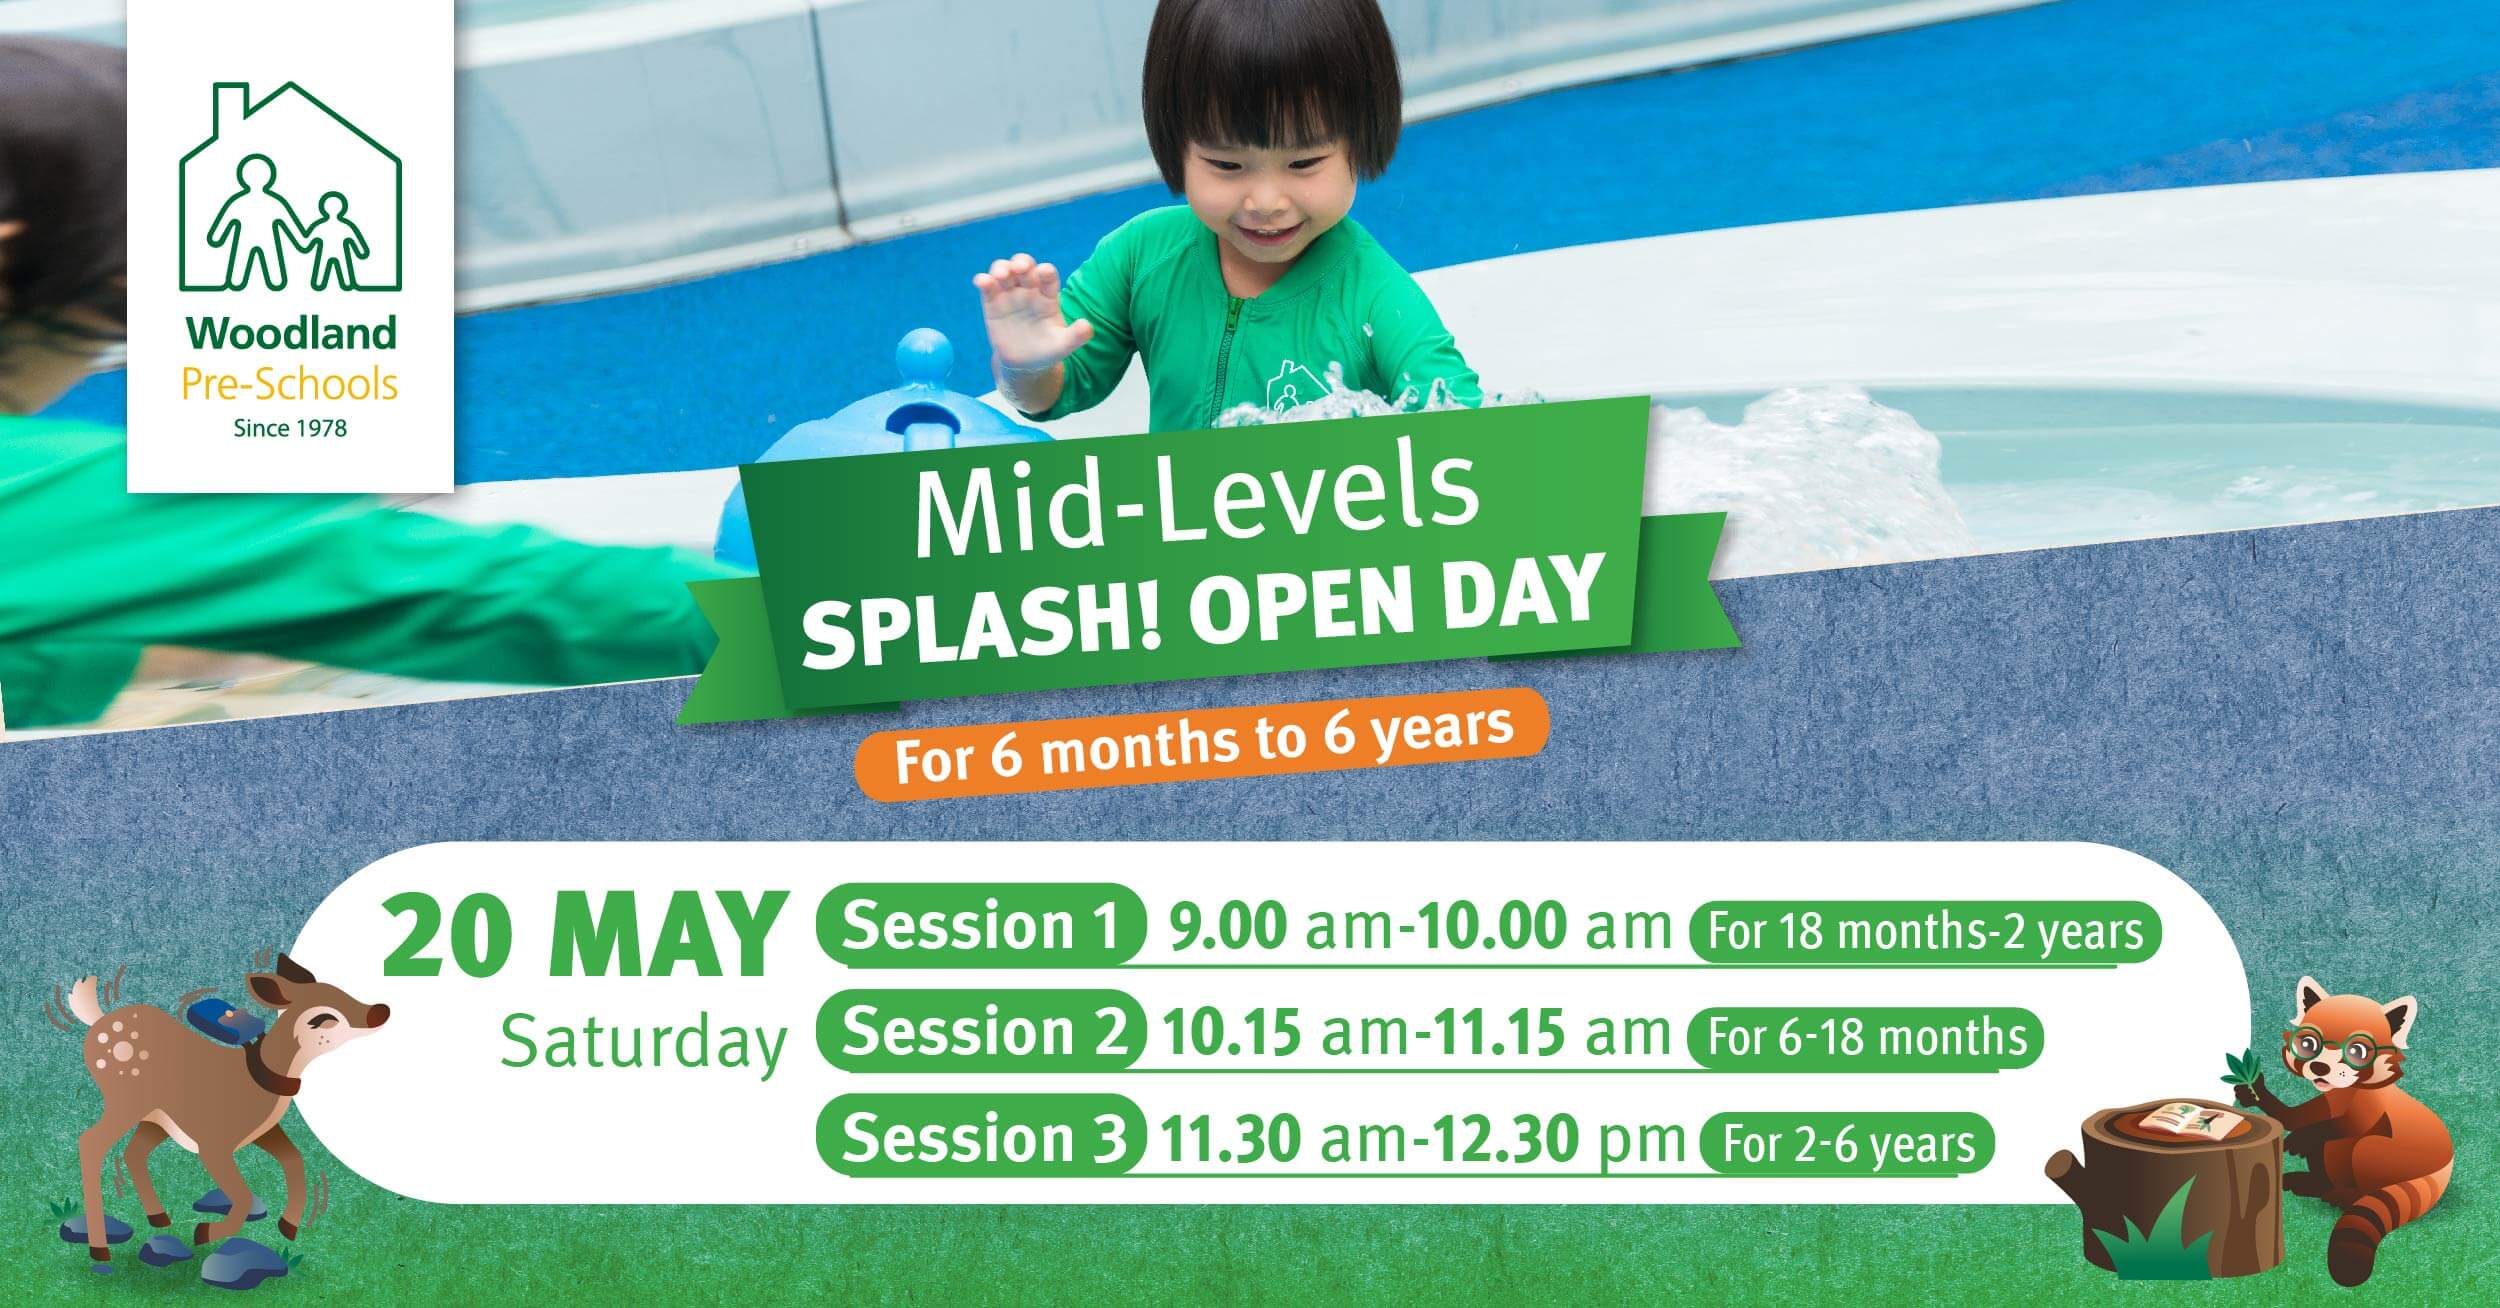 Register for our upcoming open day at Woodland Mid-Levels